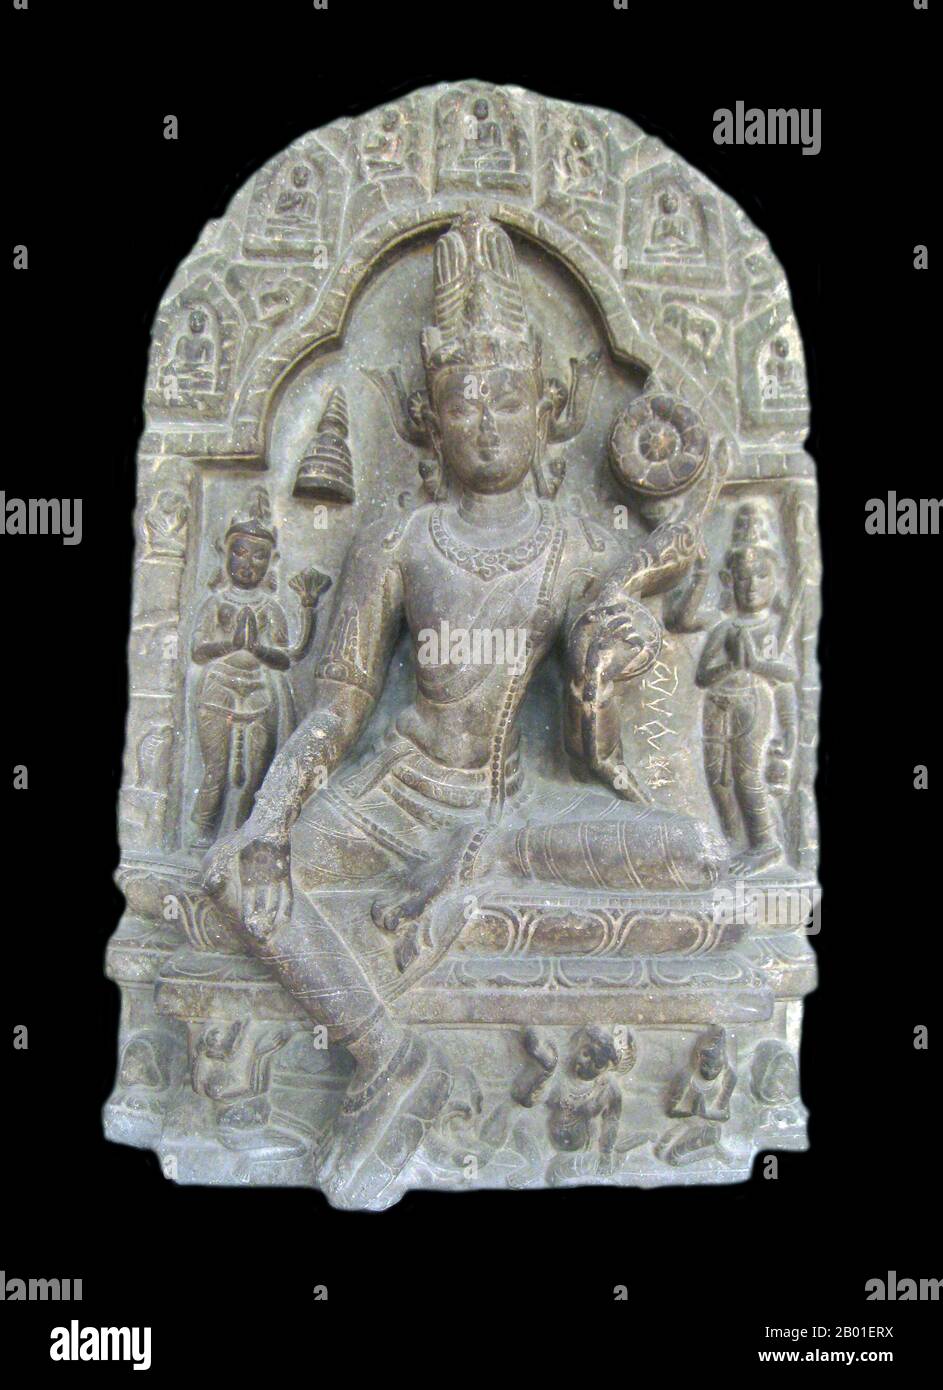 India/Bangladesh: Avalokiteshvara Padmapani, Pala Dynasty, Bengal, c. 10th-11th century CE.  The Pāla Empire, one of the major middle kingdoms of India, existed from 750-1174 CE. It was ruled by a Buddhist dynasty from Bengal in the eastern region of the Indian subcontinent, all the rulers bearing names ending with the suffix Pala (Modern Bengali: পাল pāl), which means protector. The Palas were often described by opponents as the Lords of Gauda. The Palas were followers of the Mahayana and Tantric schools of Buddhism. Gopala was the first ruler from the dynasty. Stock Photo